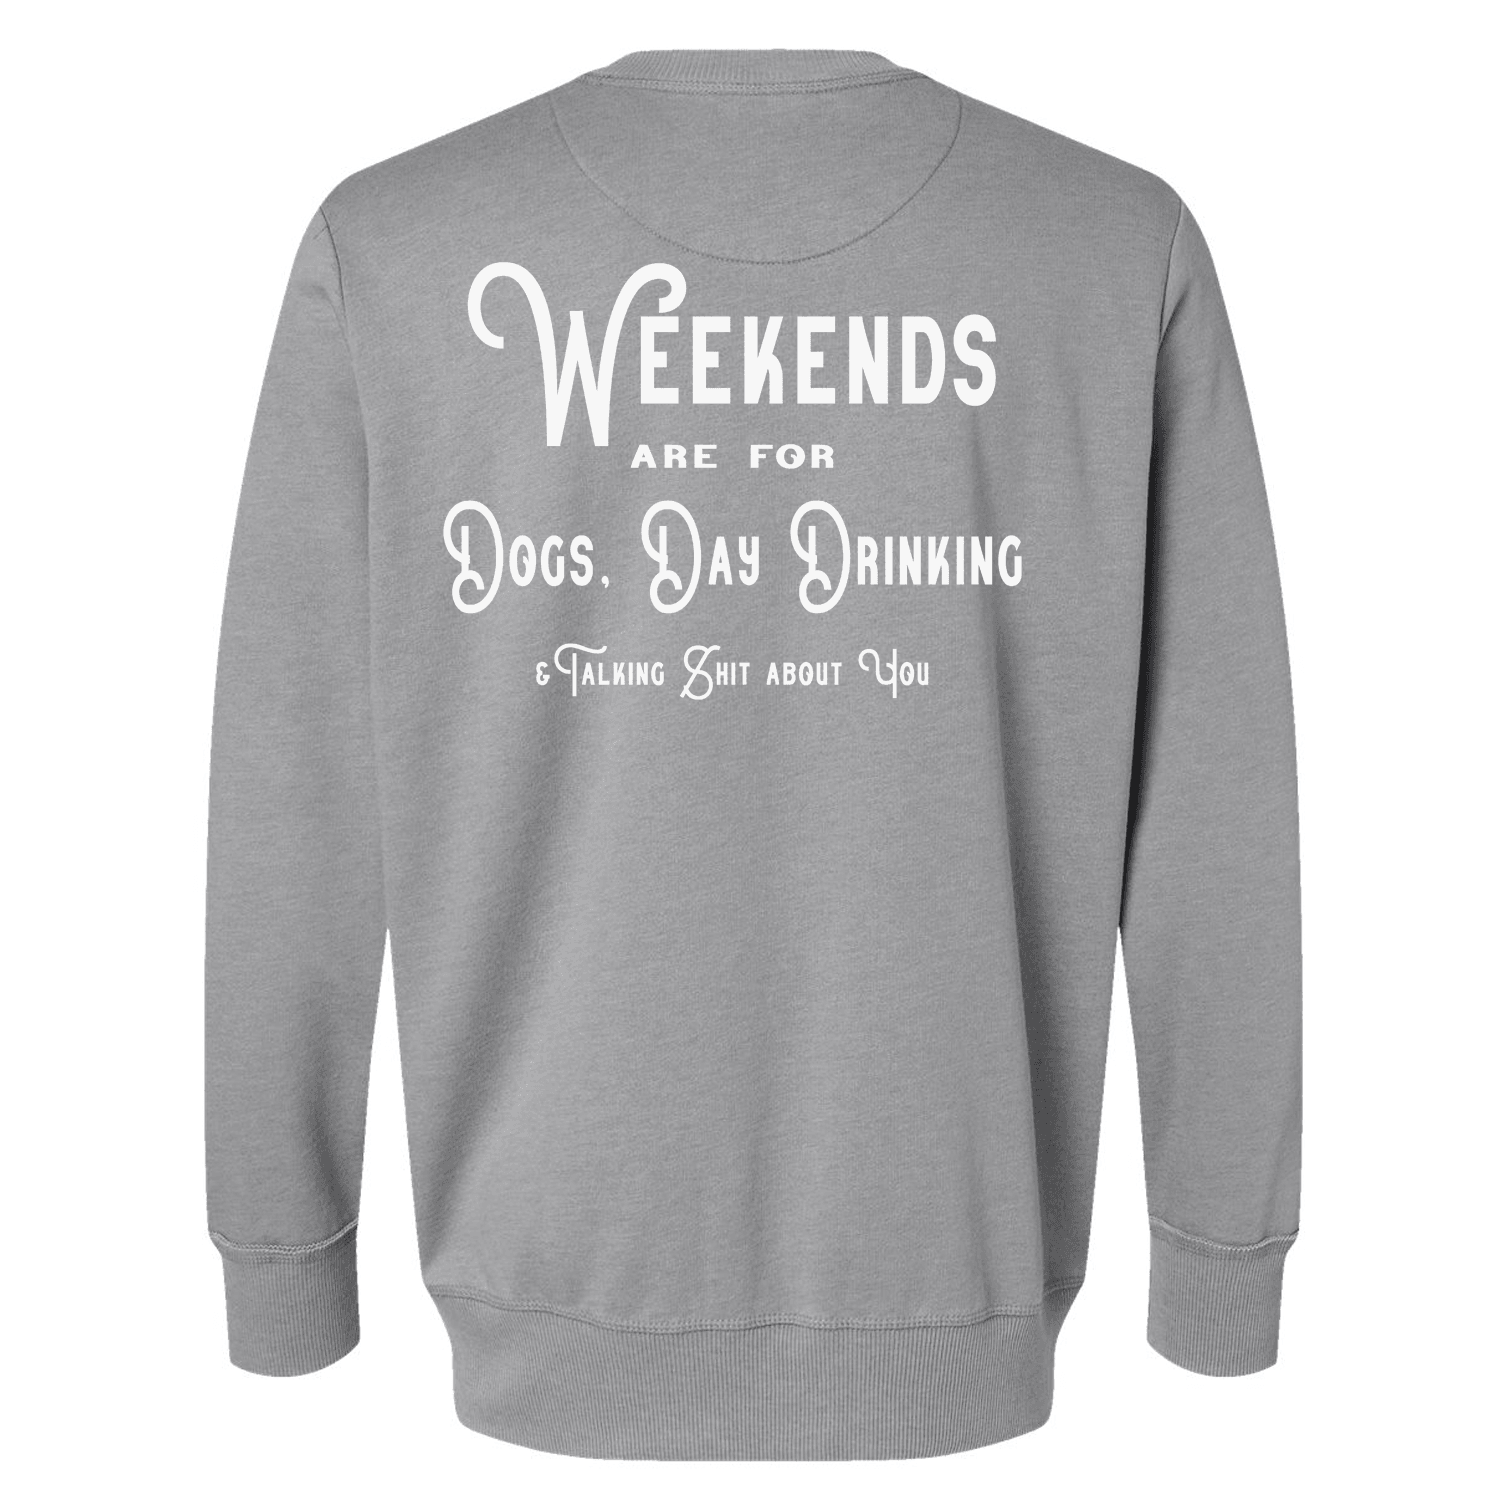 Weekends are For Dogs, day drinking.. Sweatshirt - Ales to Trails